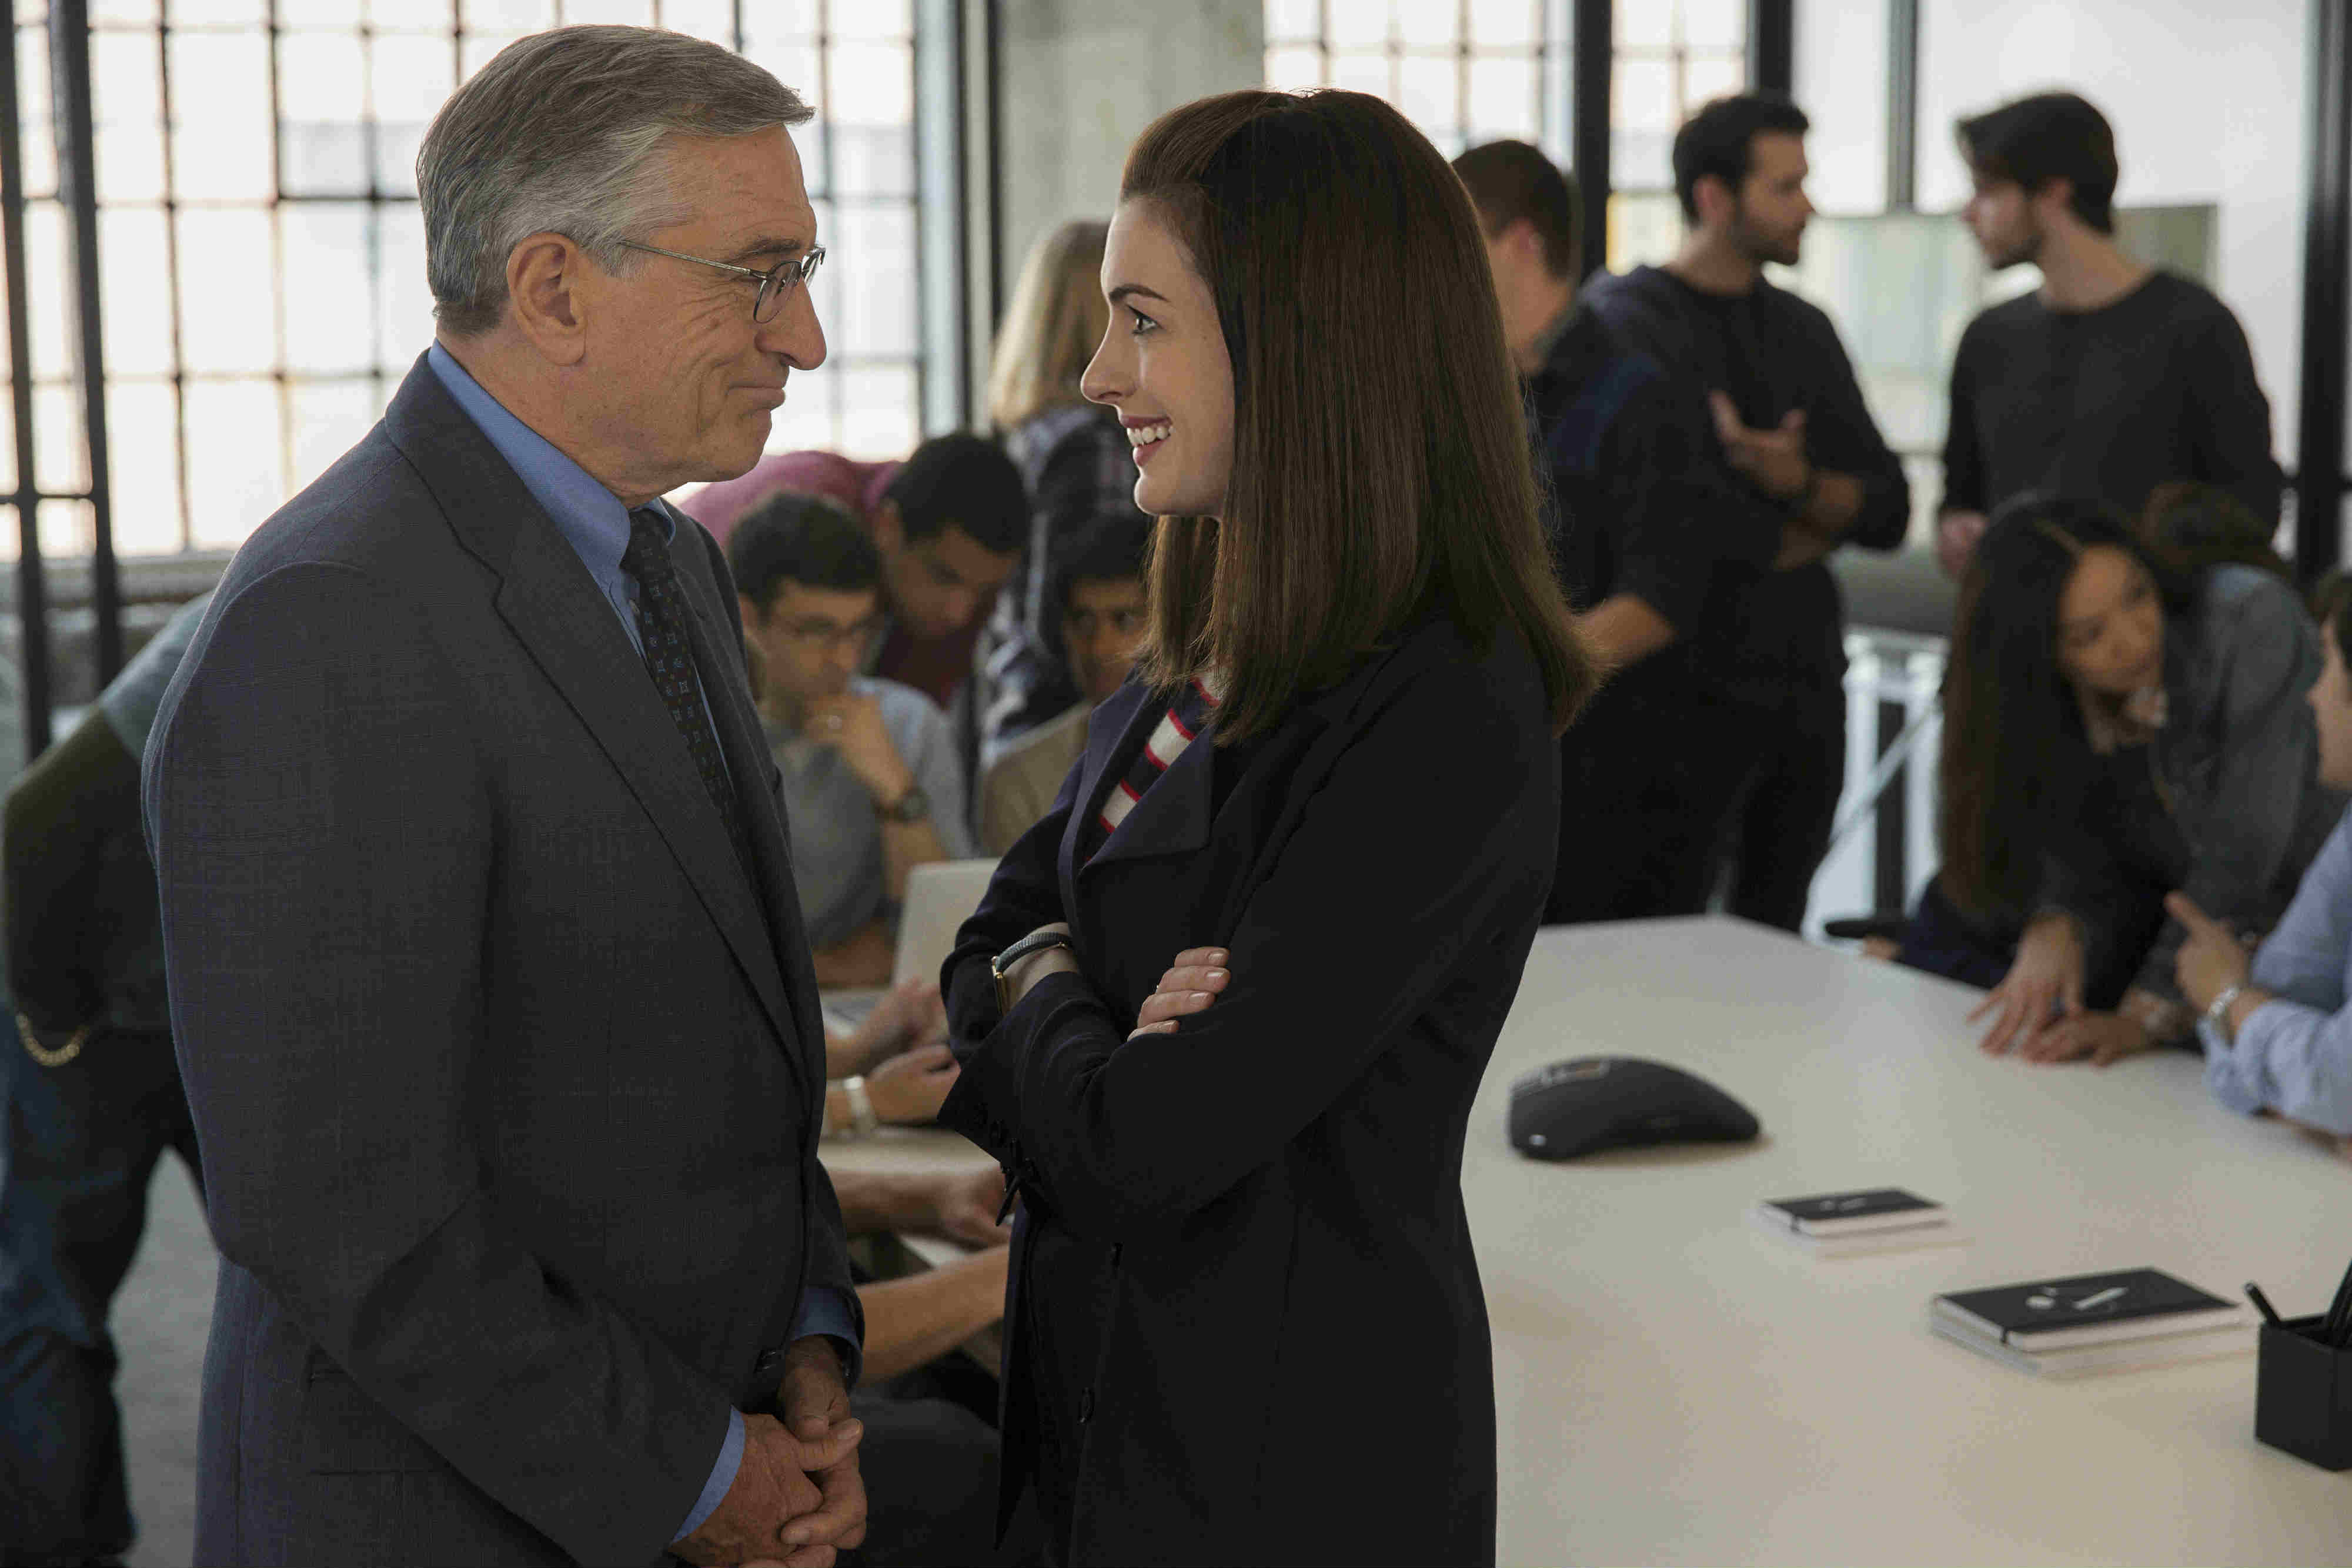 "The Intern" movie review by David Morris